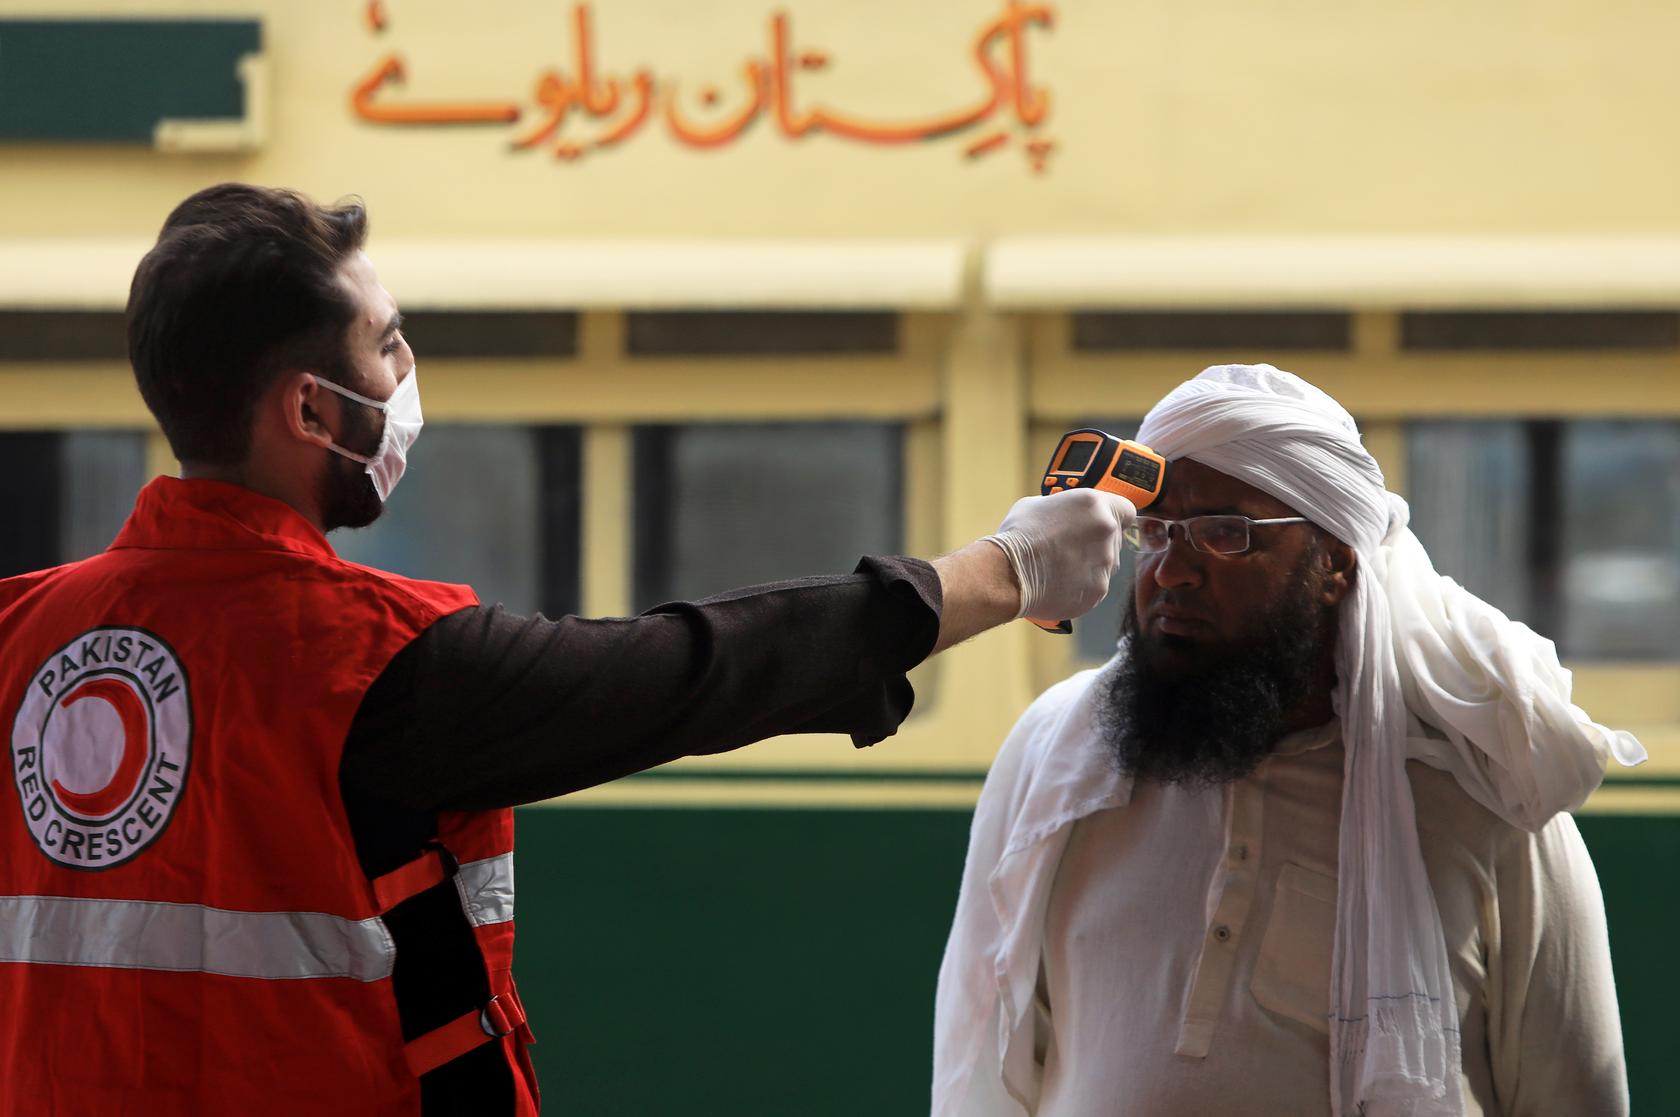 A worker checks a man's temperature following an outbreak of the coronavirus disease (COVID-19), at a railway station in Peshawar, Pakistan. (Reuters Photo)